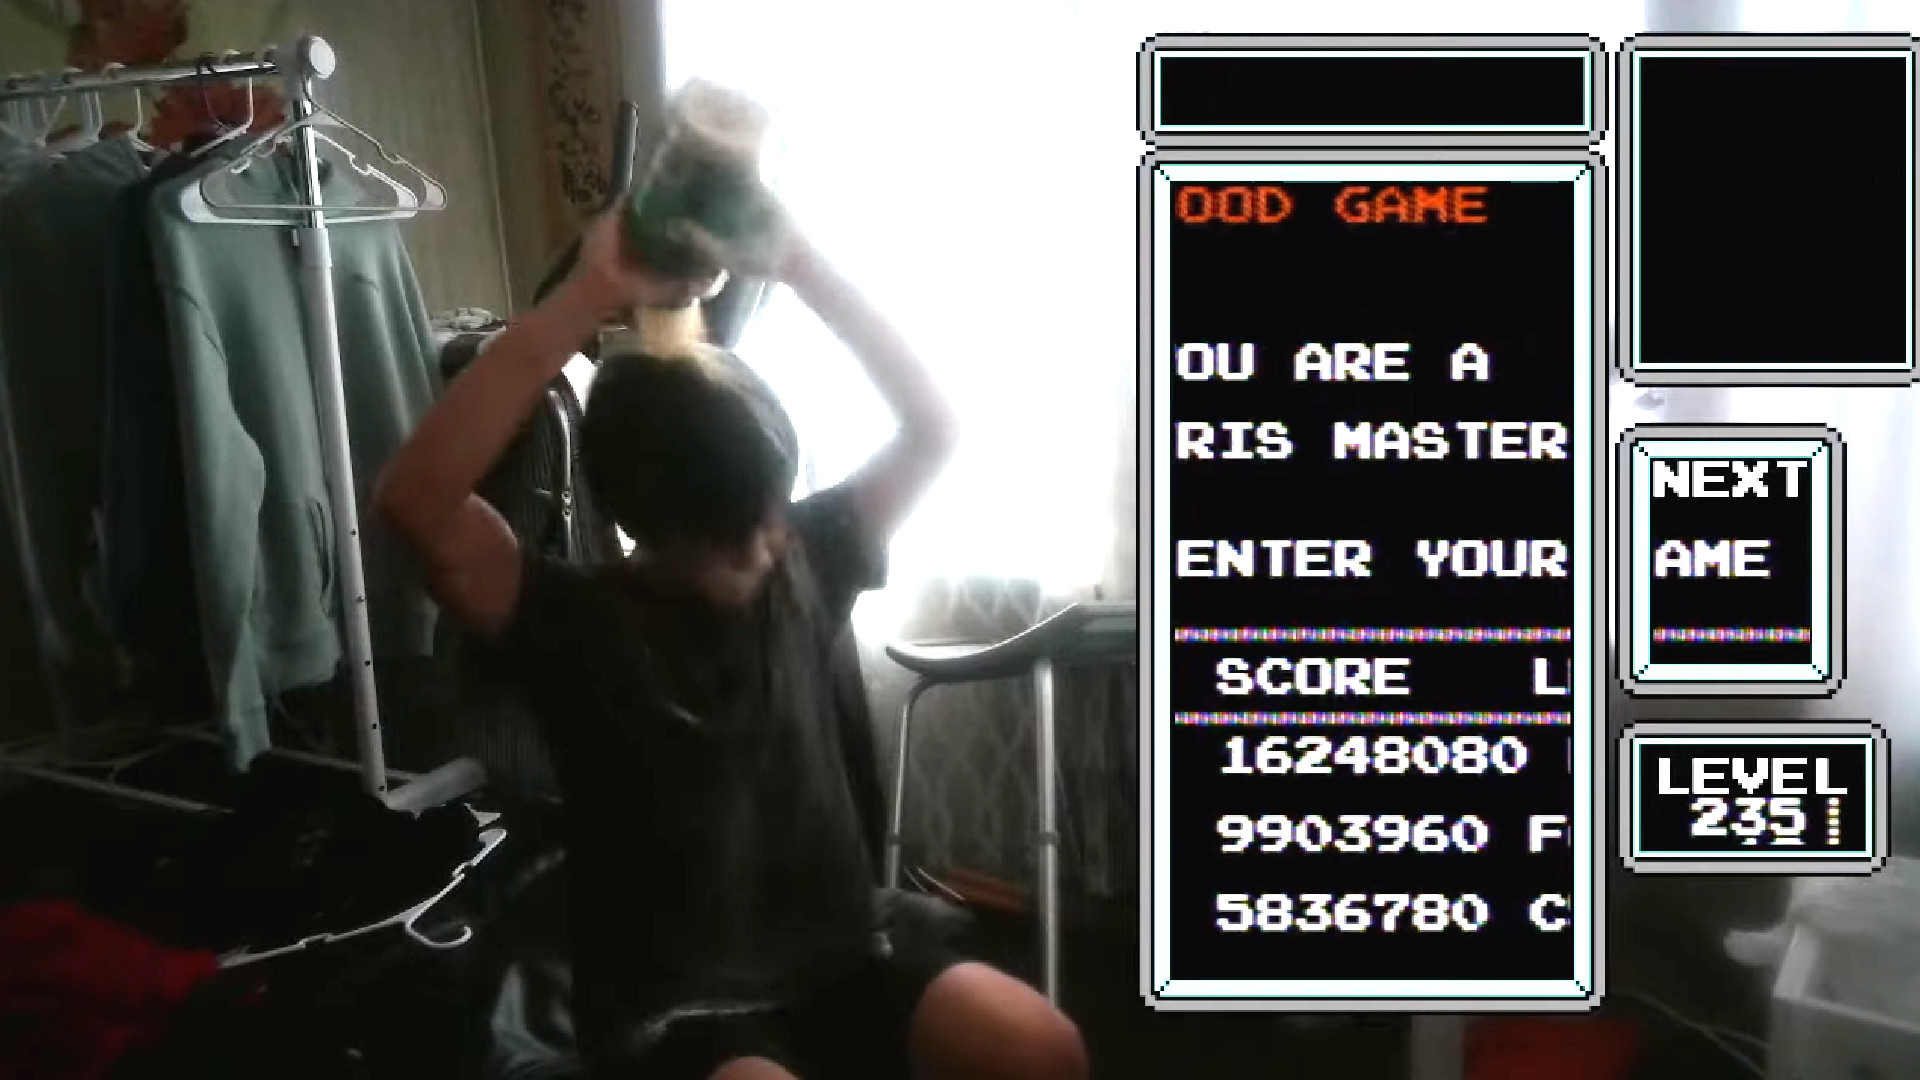 15-year-old kid demolishes the game of Tetris, obliterating every major world record and pouring cheese over his head to celebrate